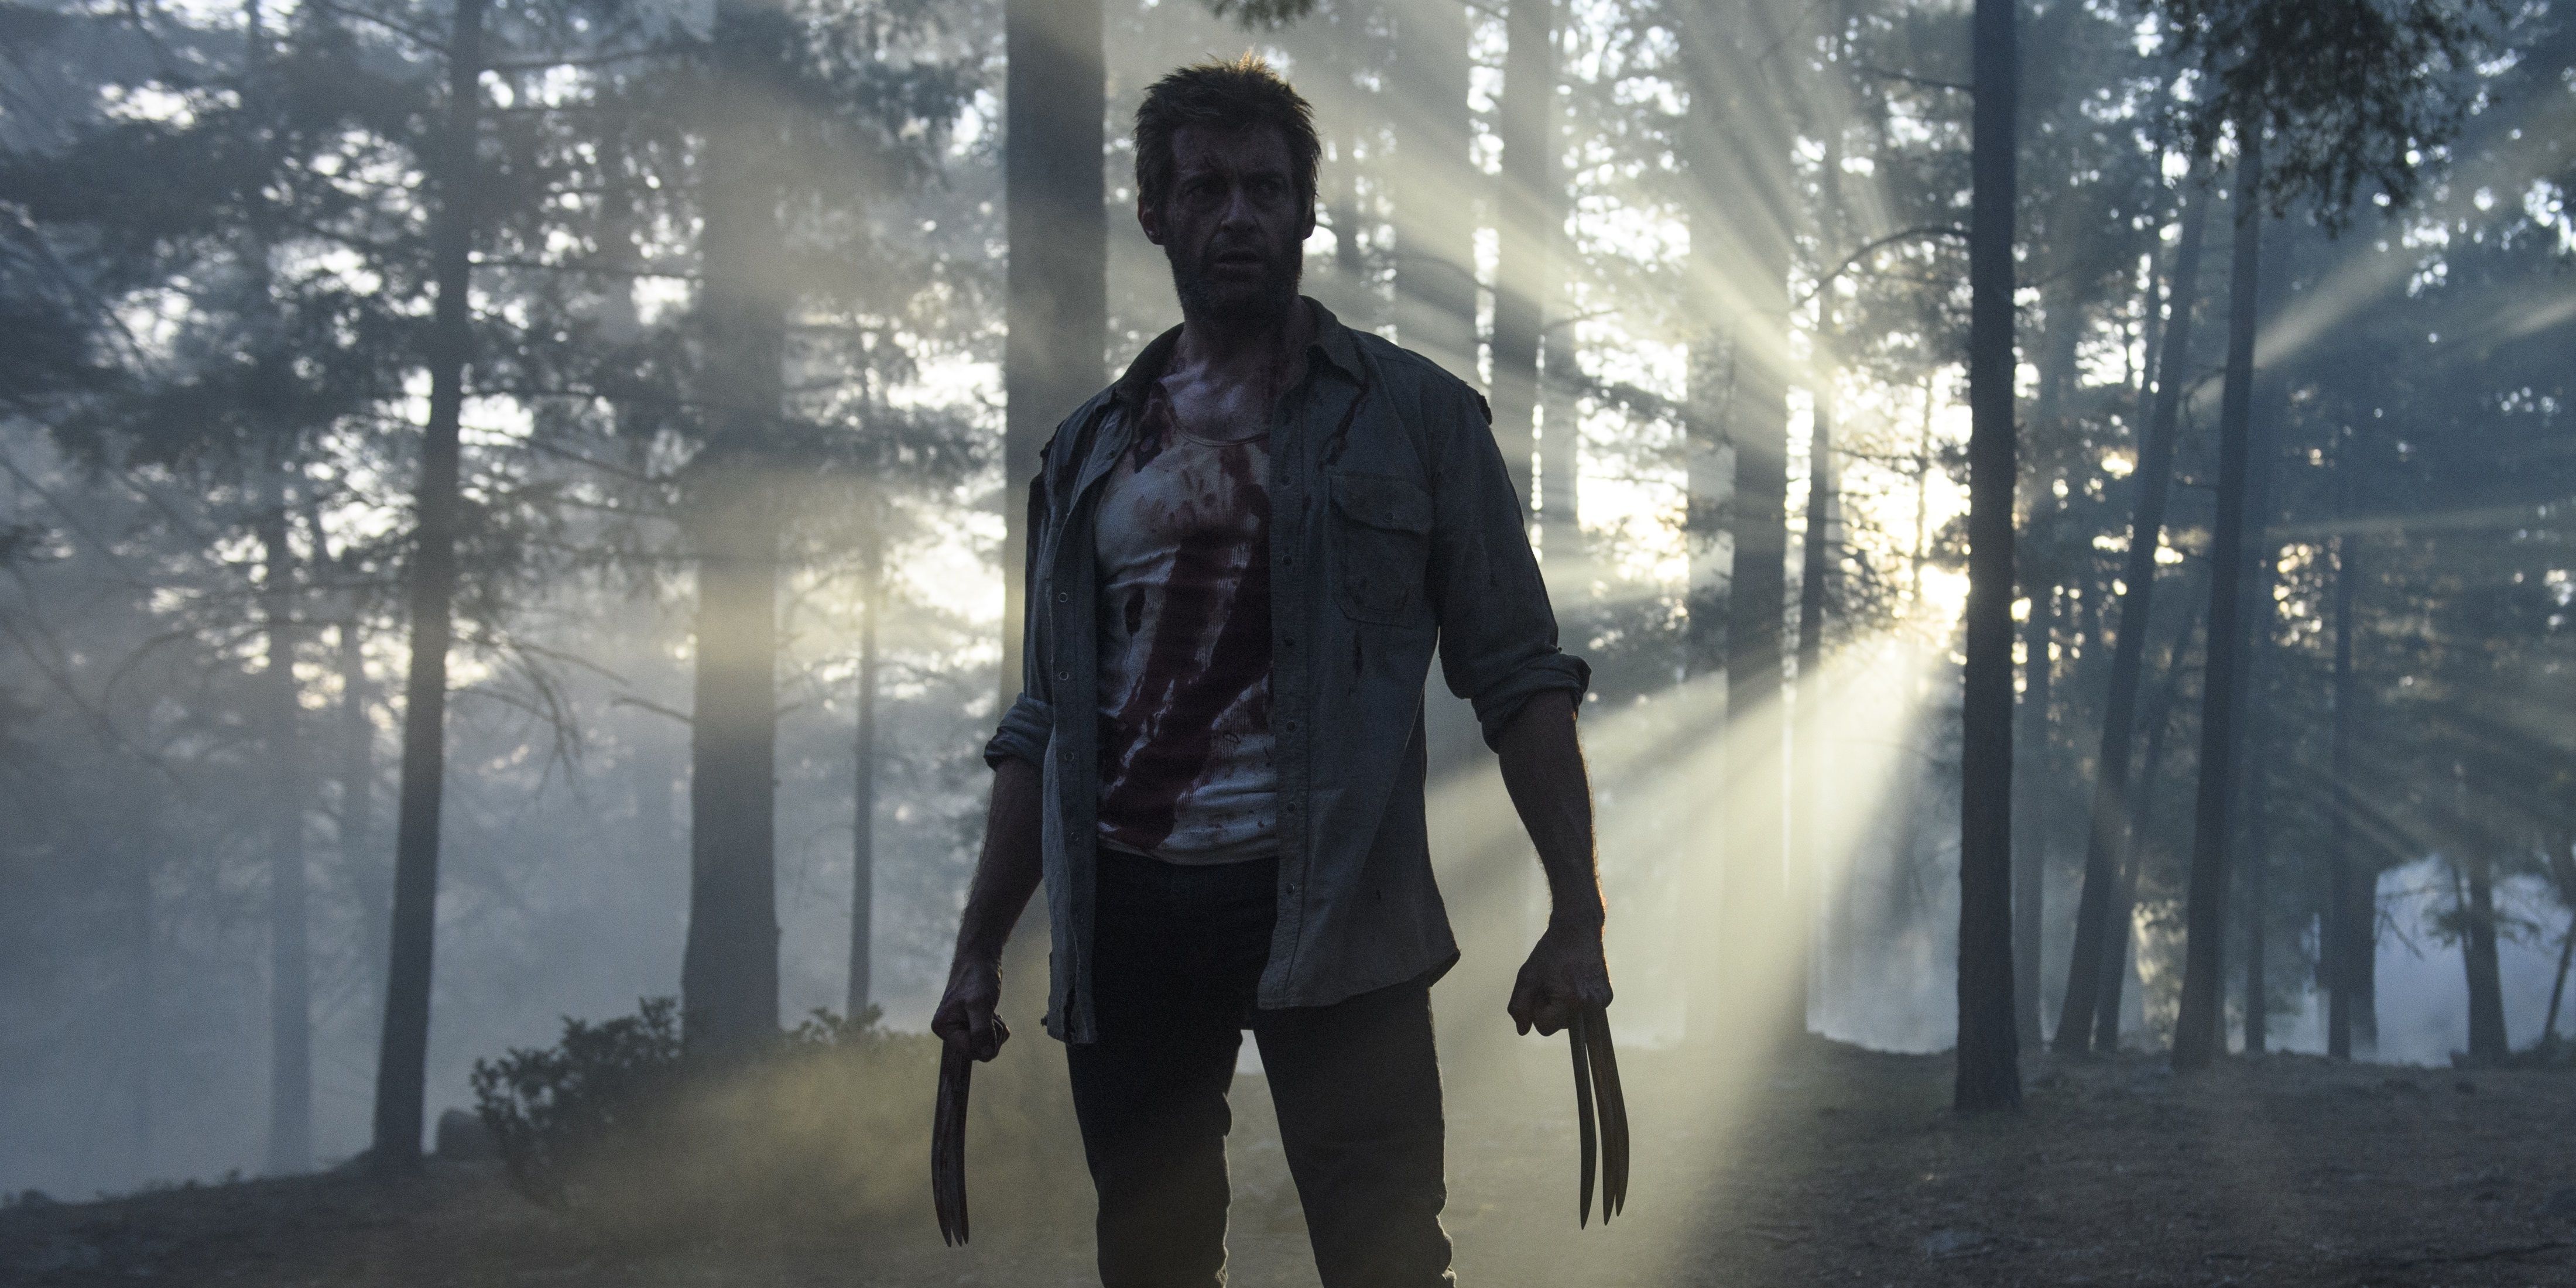 Hugh Jackman as Wolverine standing in a forest in Logan.